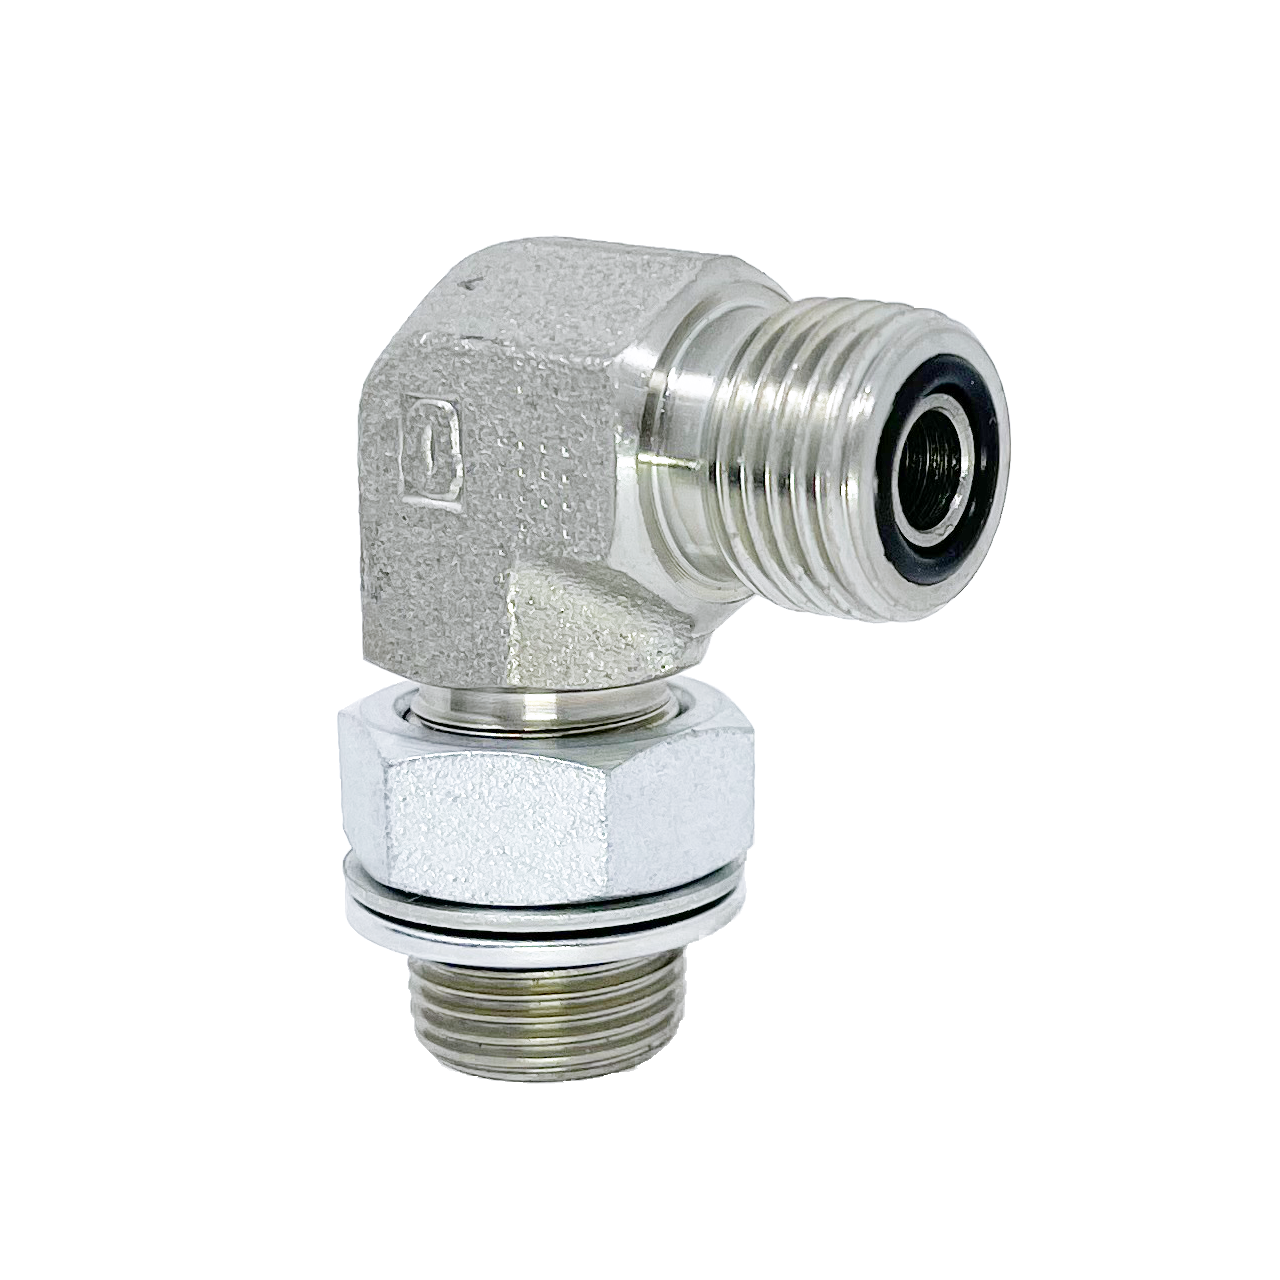 6058-10-08 : Adaptall 45-Degree Adapter, Male 0.625 (5/8") ORFS x Male 0.5 (1/2") BSPP, Carbon Steel